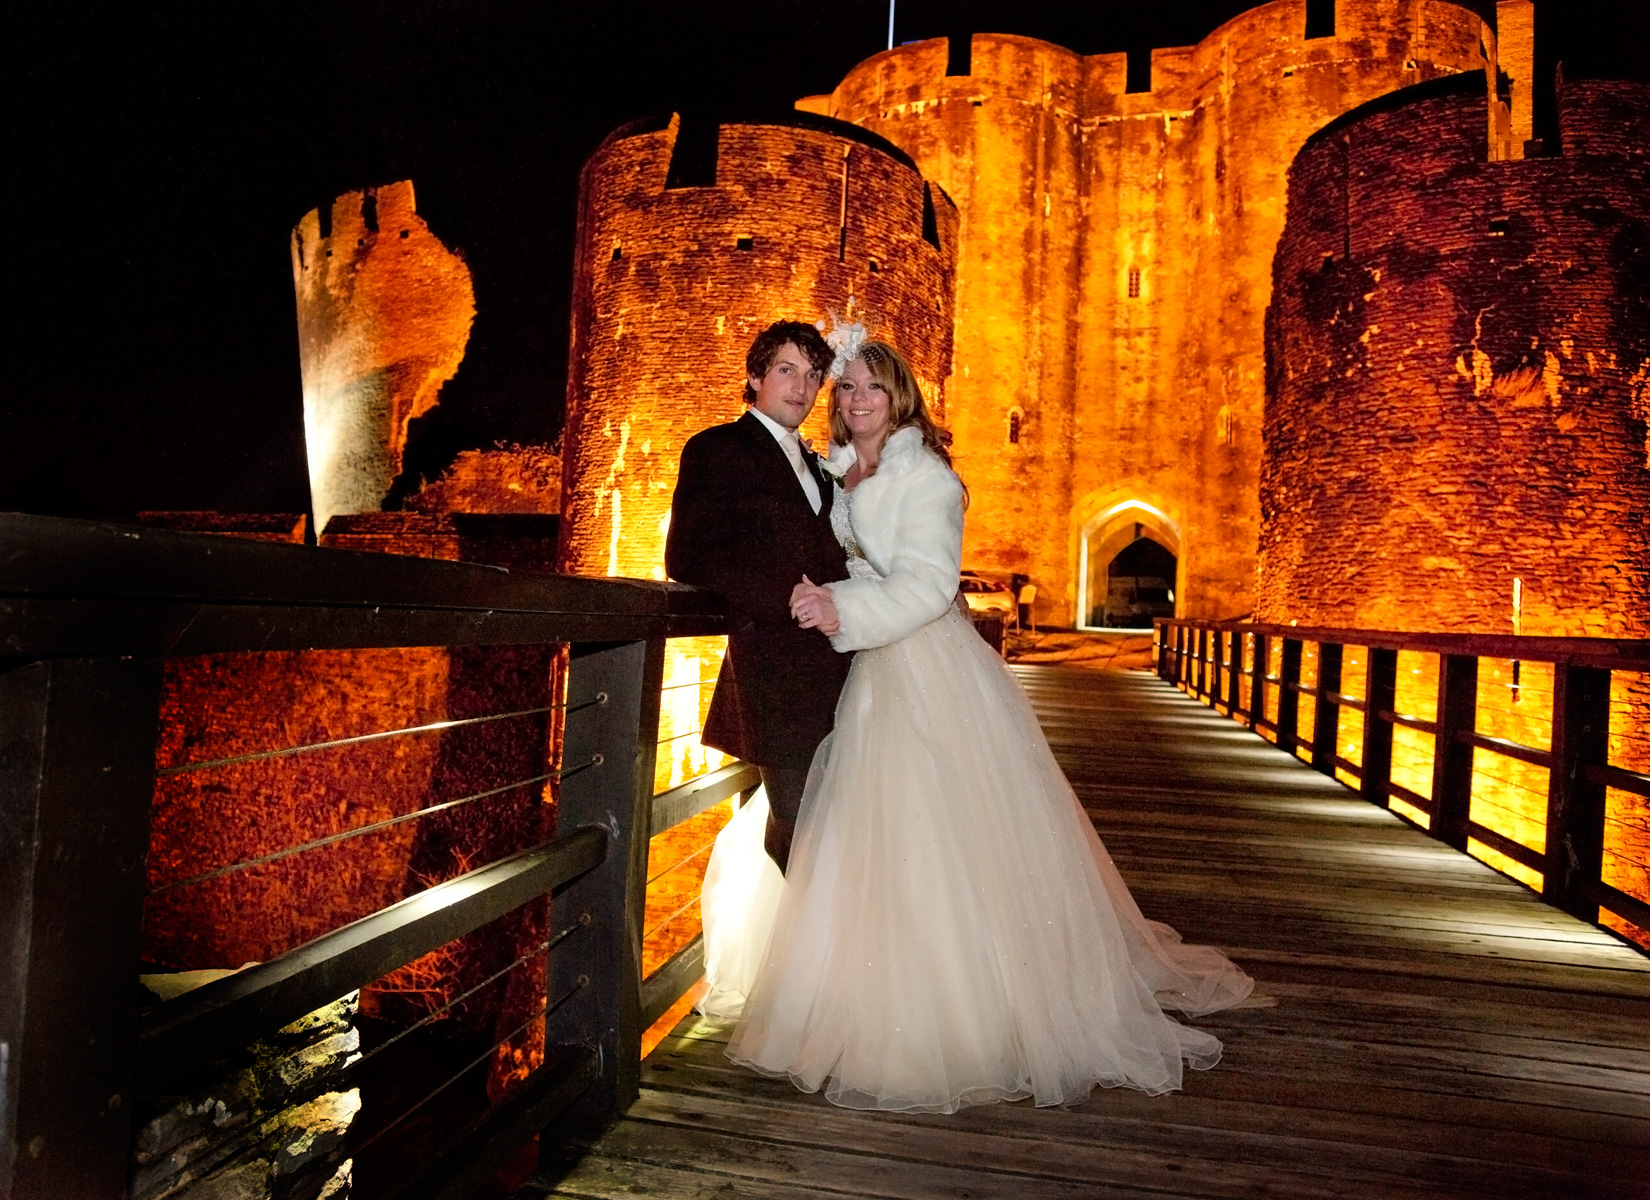 Winter-weddings-bride-groom-caerphilly-castle-floodlit-south-wales-winter-wedding-photography